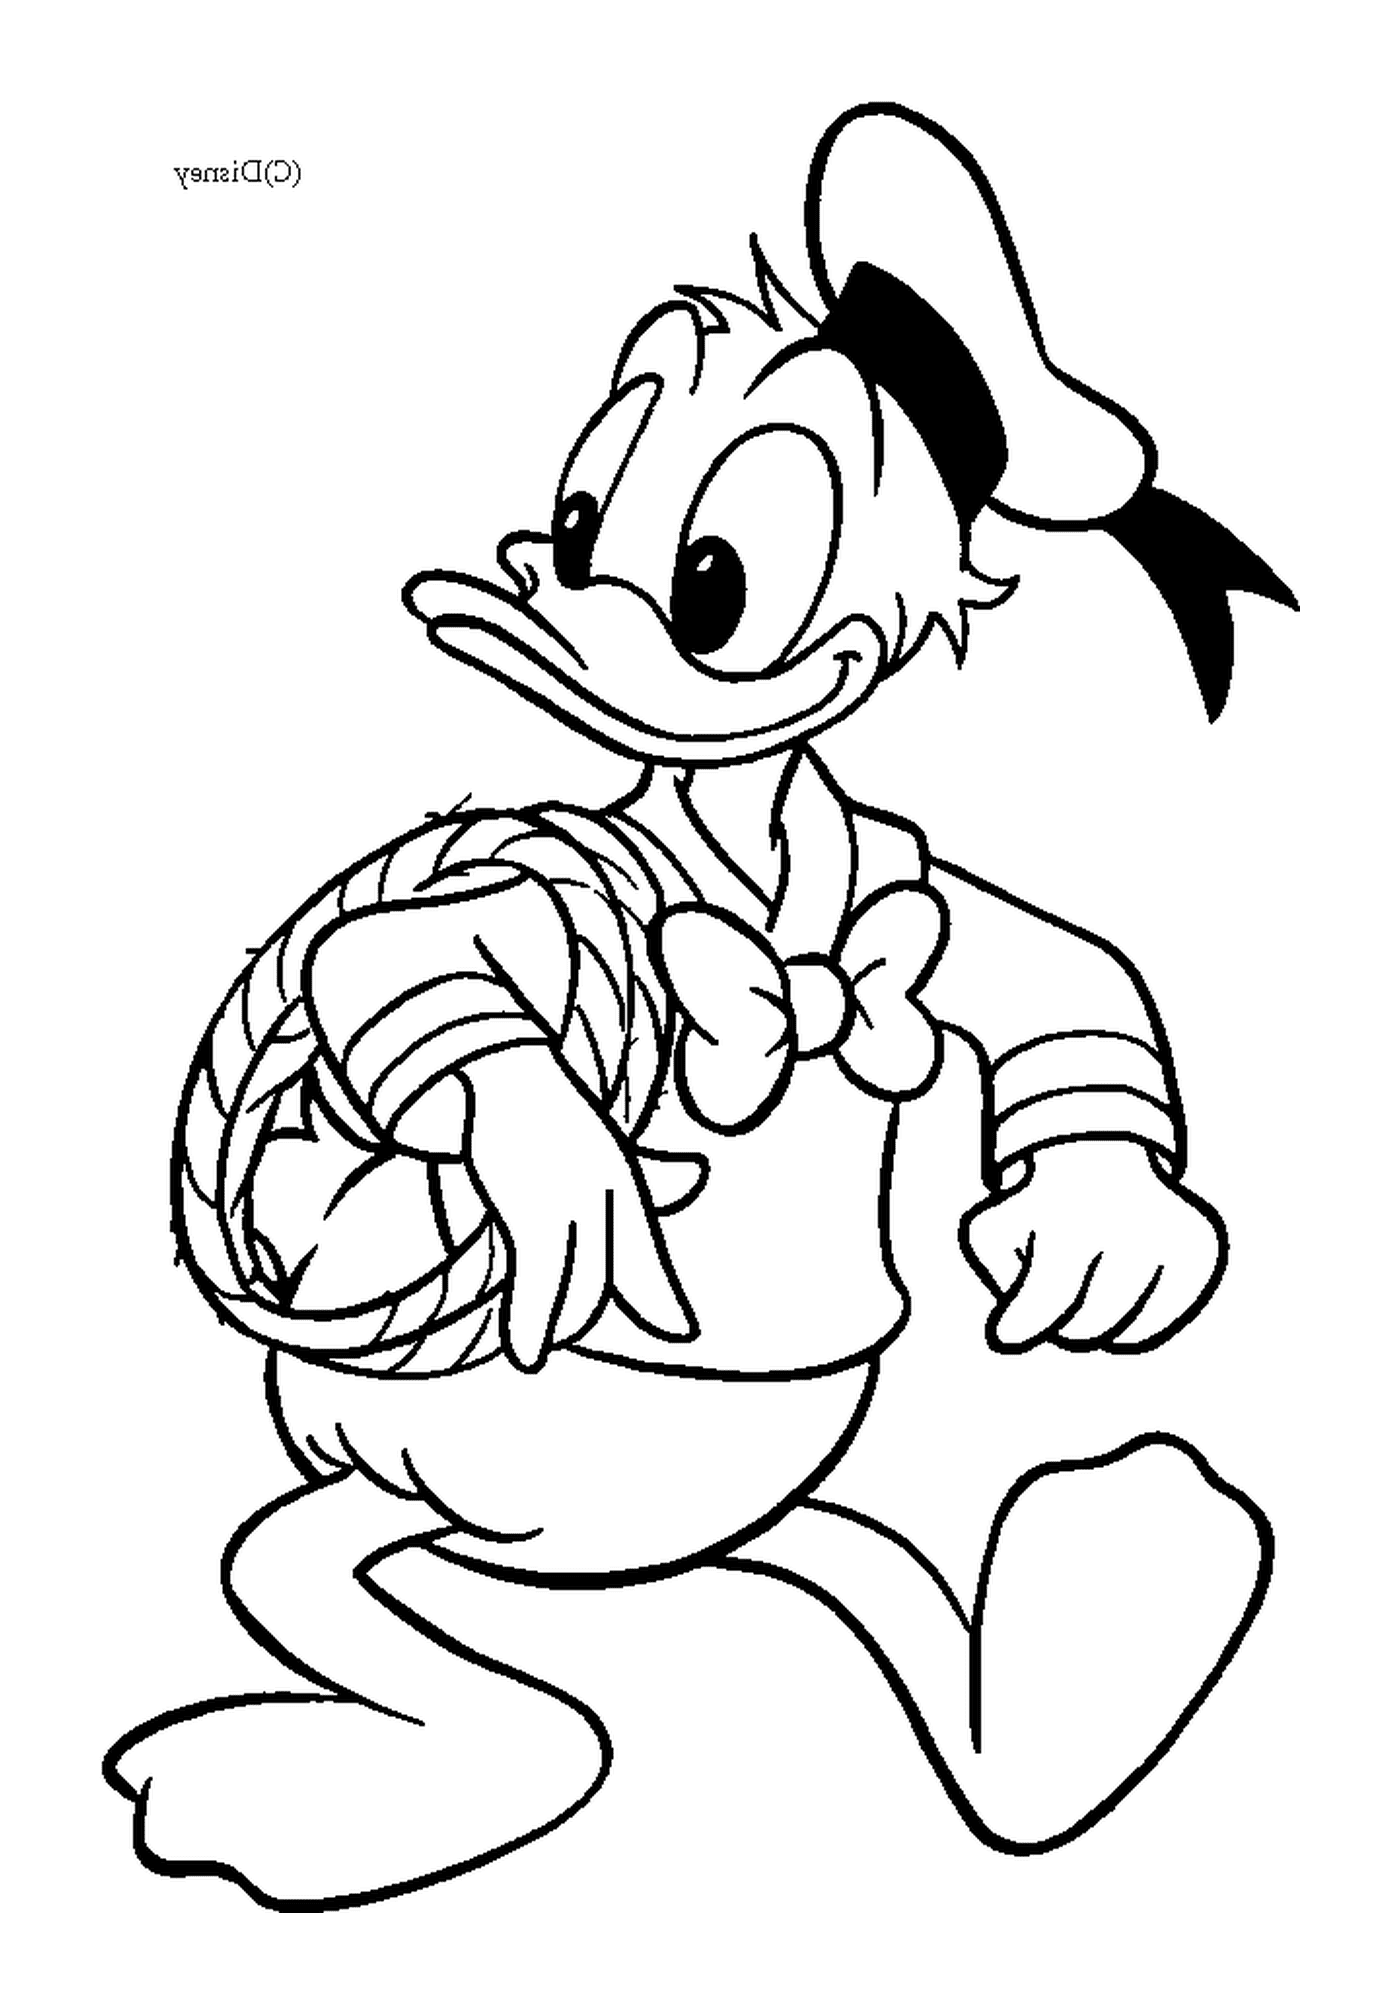  Donald holds a rope with determination 